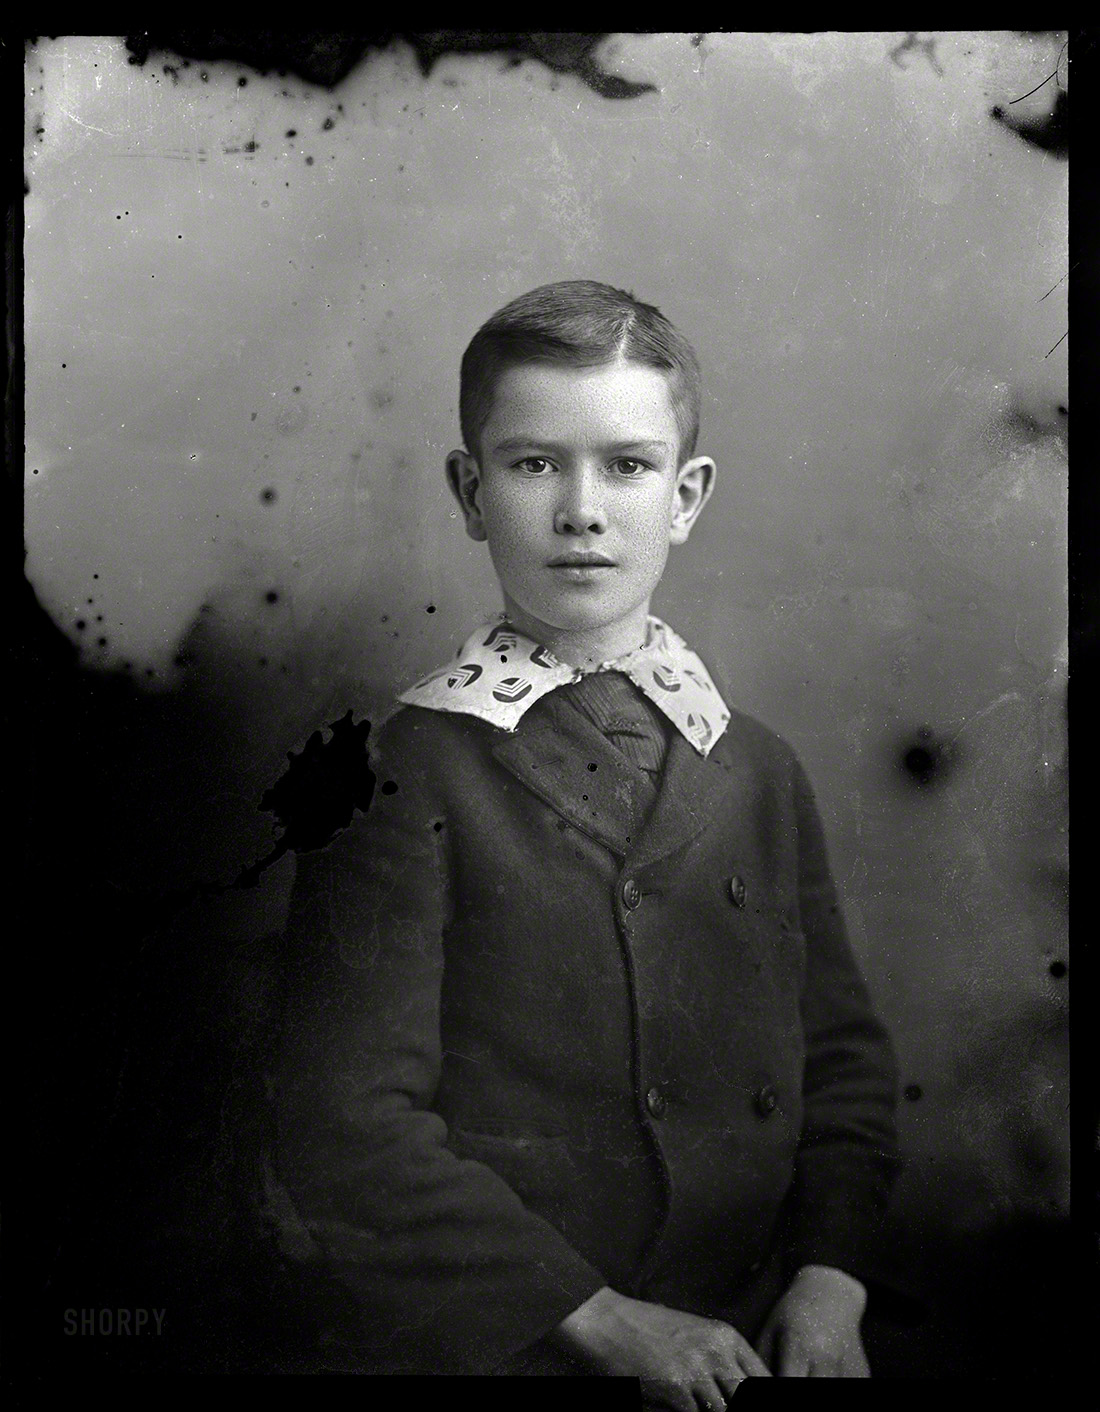 "Armstrong, Master. Between February 1894 and February 1901." 5x7 glass negative from the C.M. Bell portrait studio in Washington, D.C. View full size.